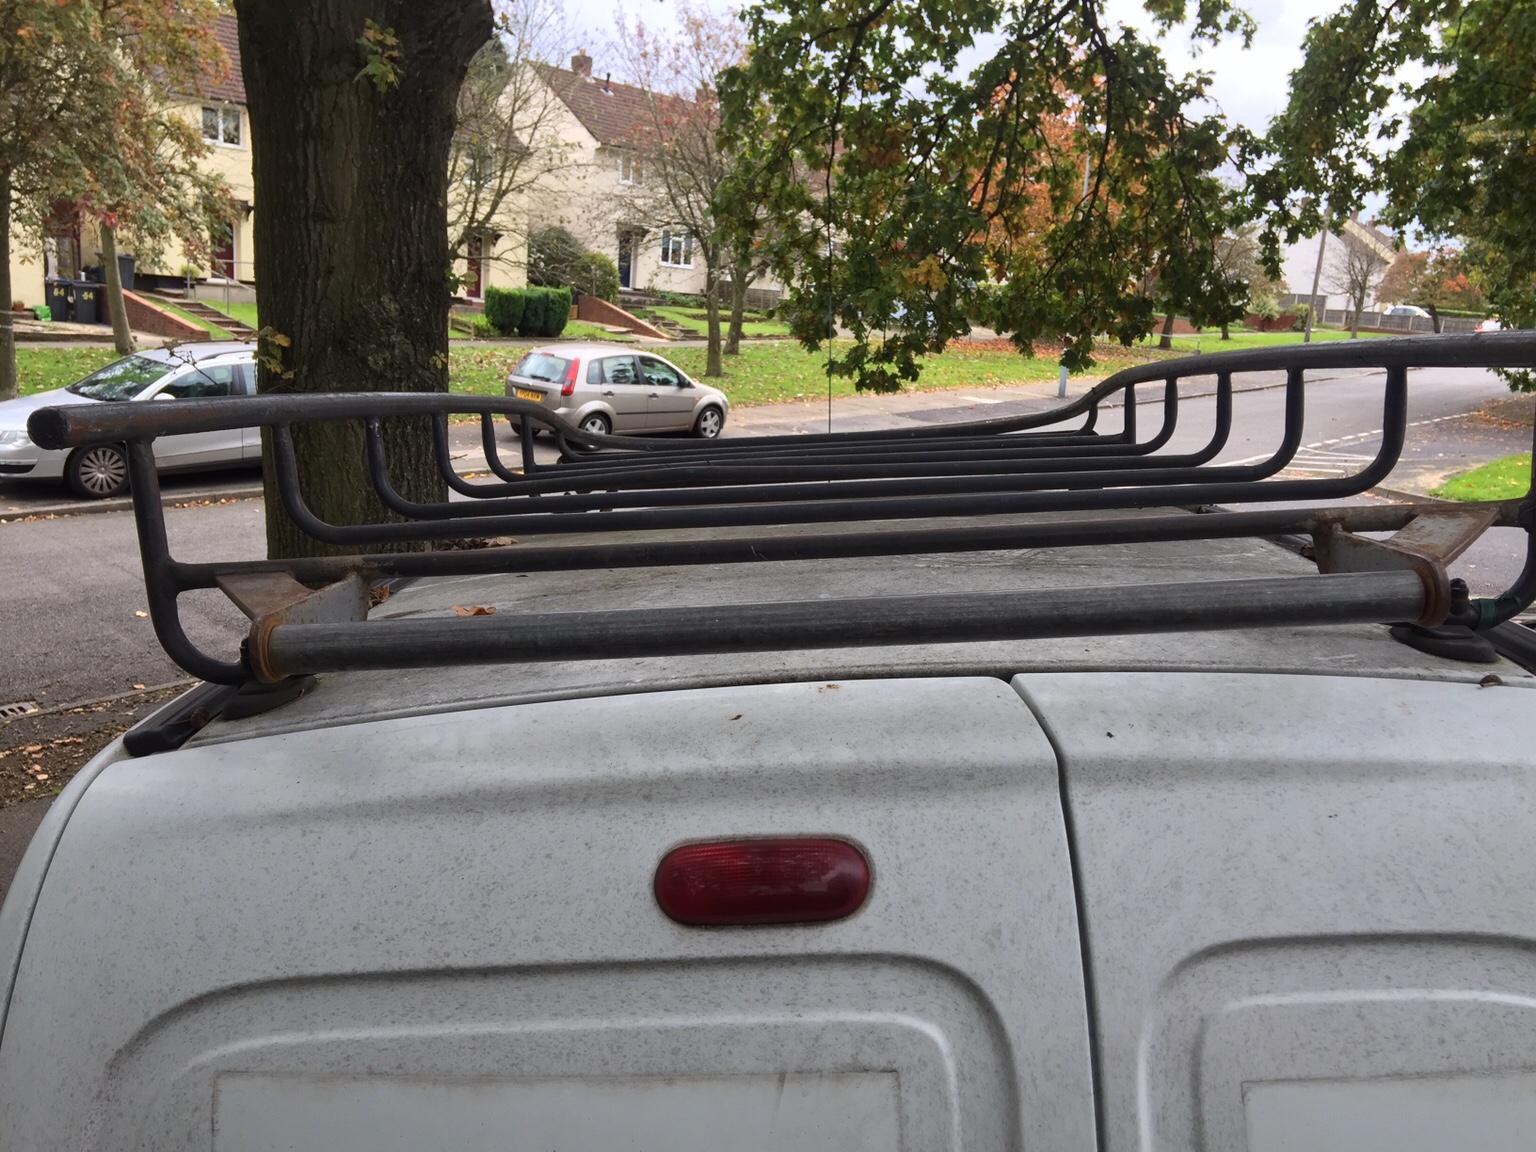 Roof Rack In B32 Birmingham For 100 00 For Sale Shpock